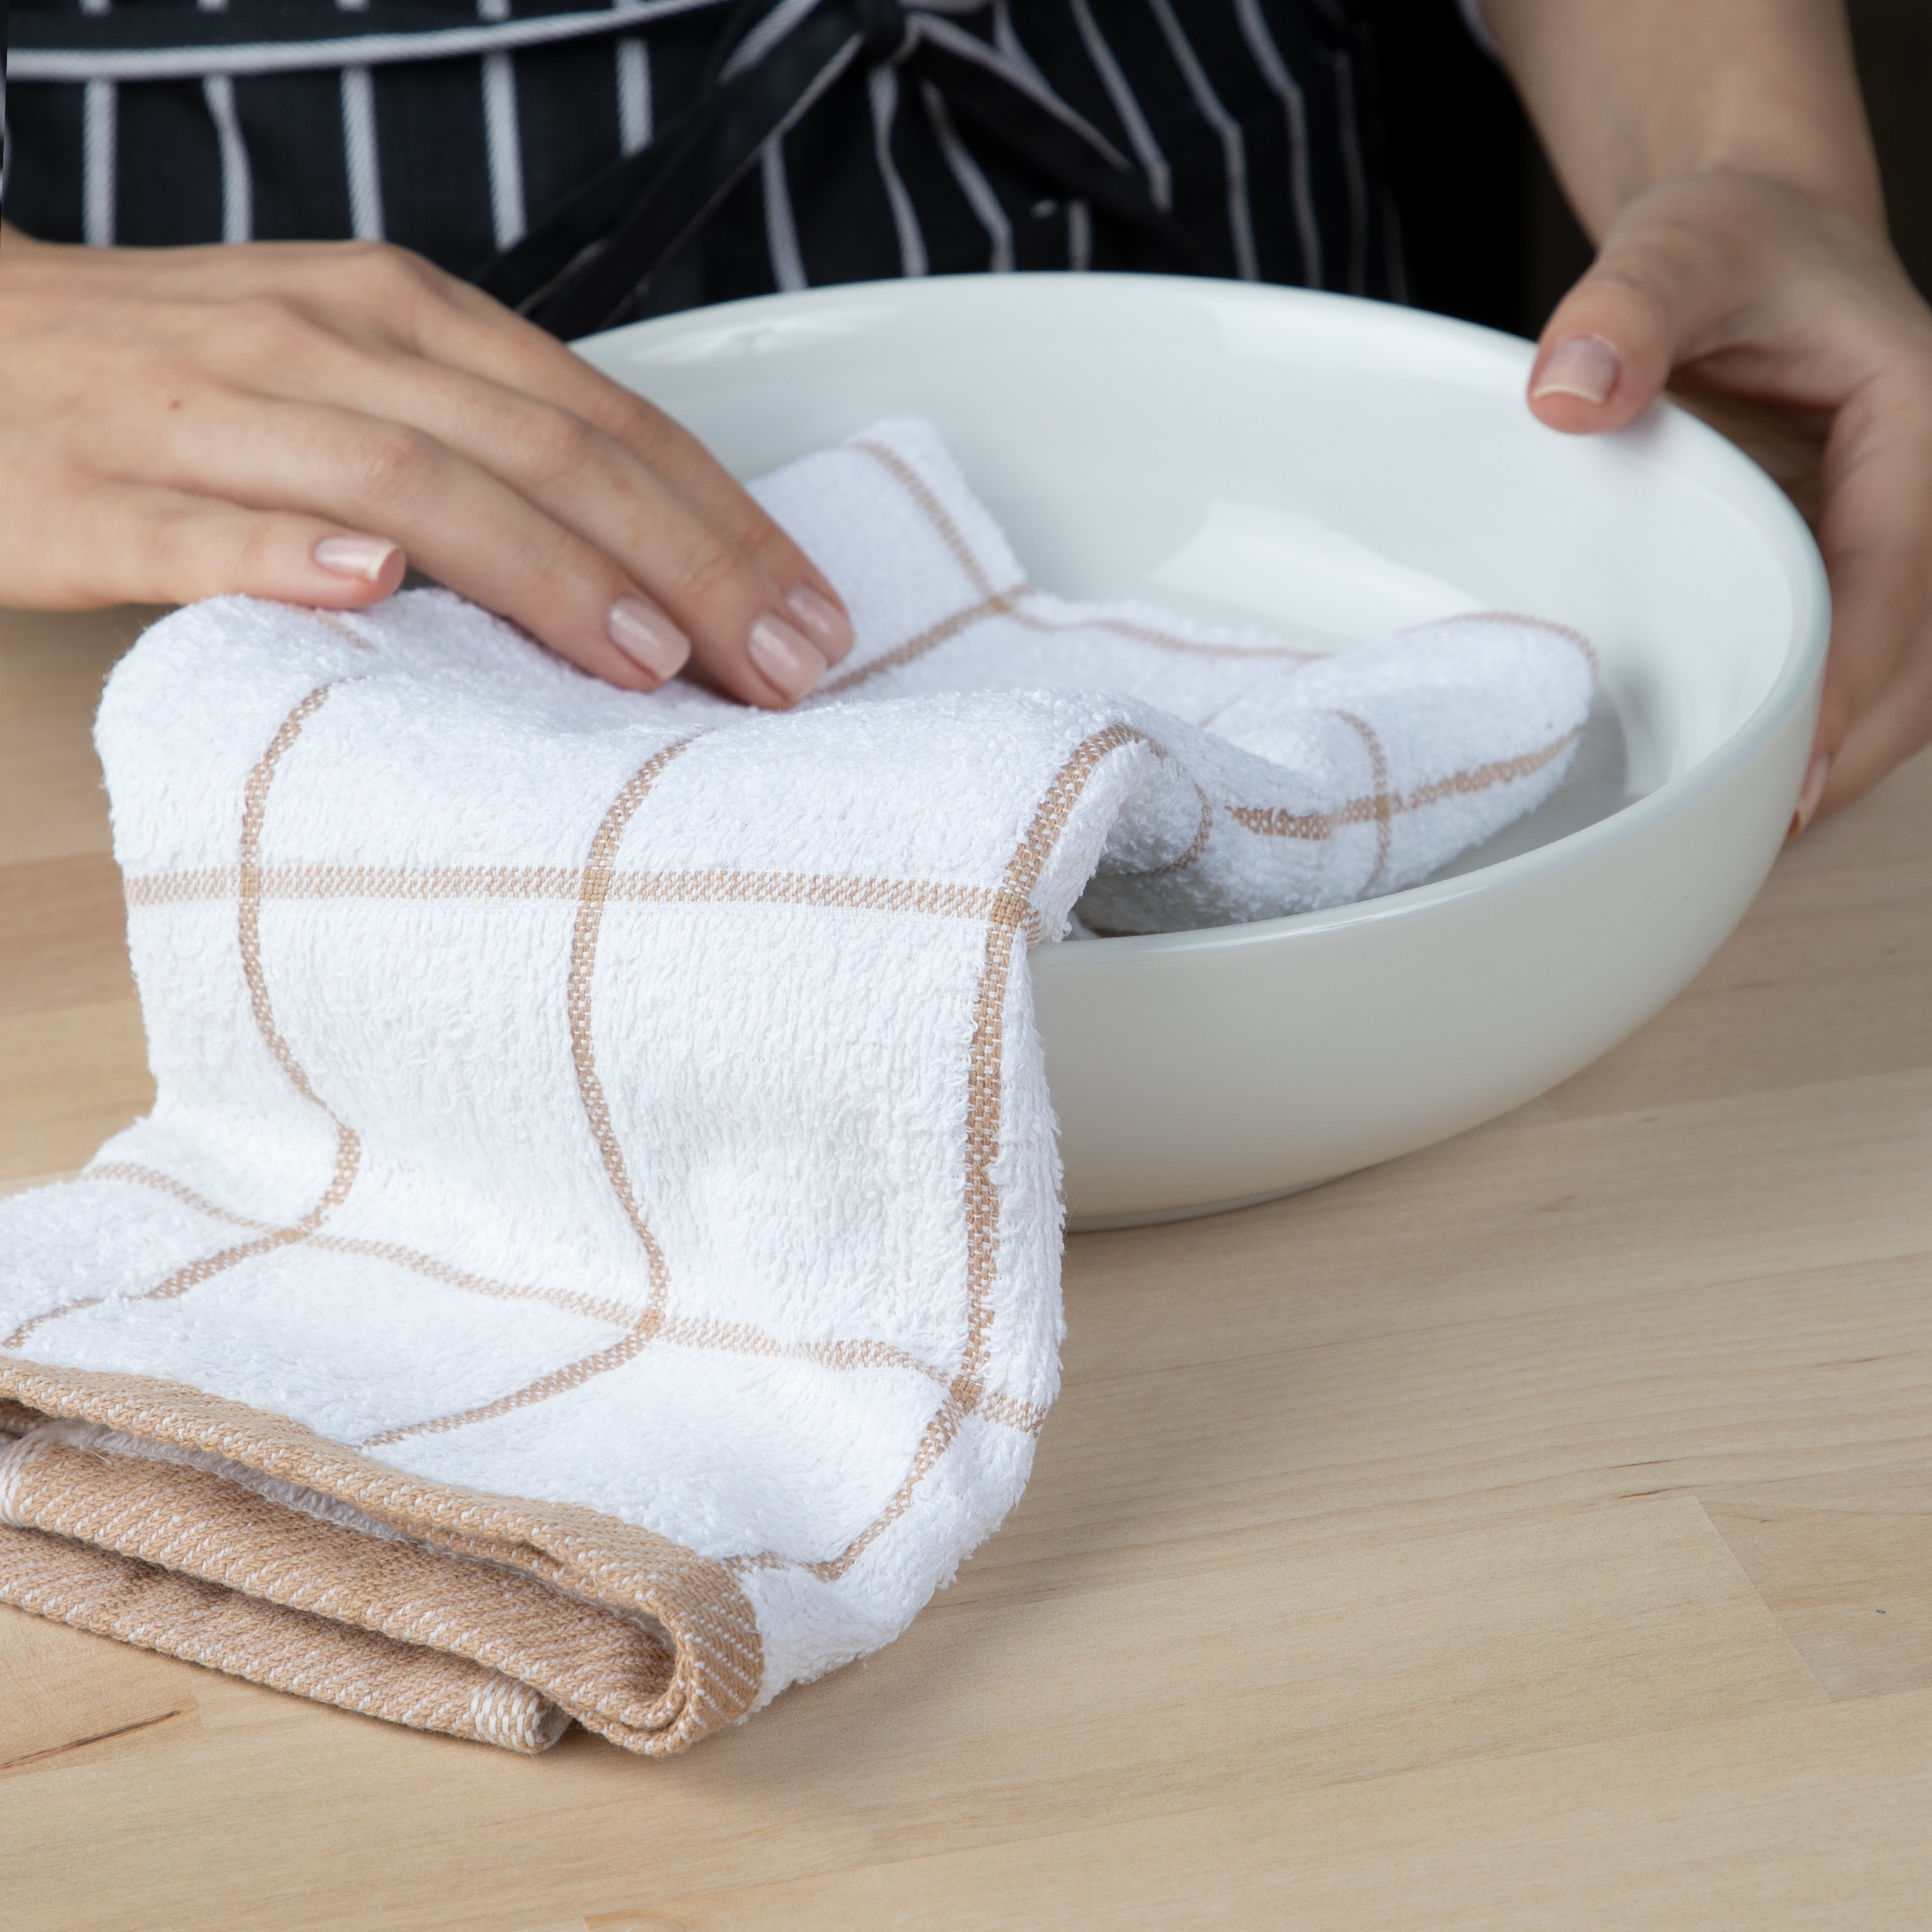 Thick Linen Kitchen Towels Ivy & Creeper (set of 2)